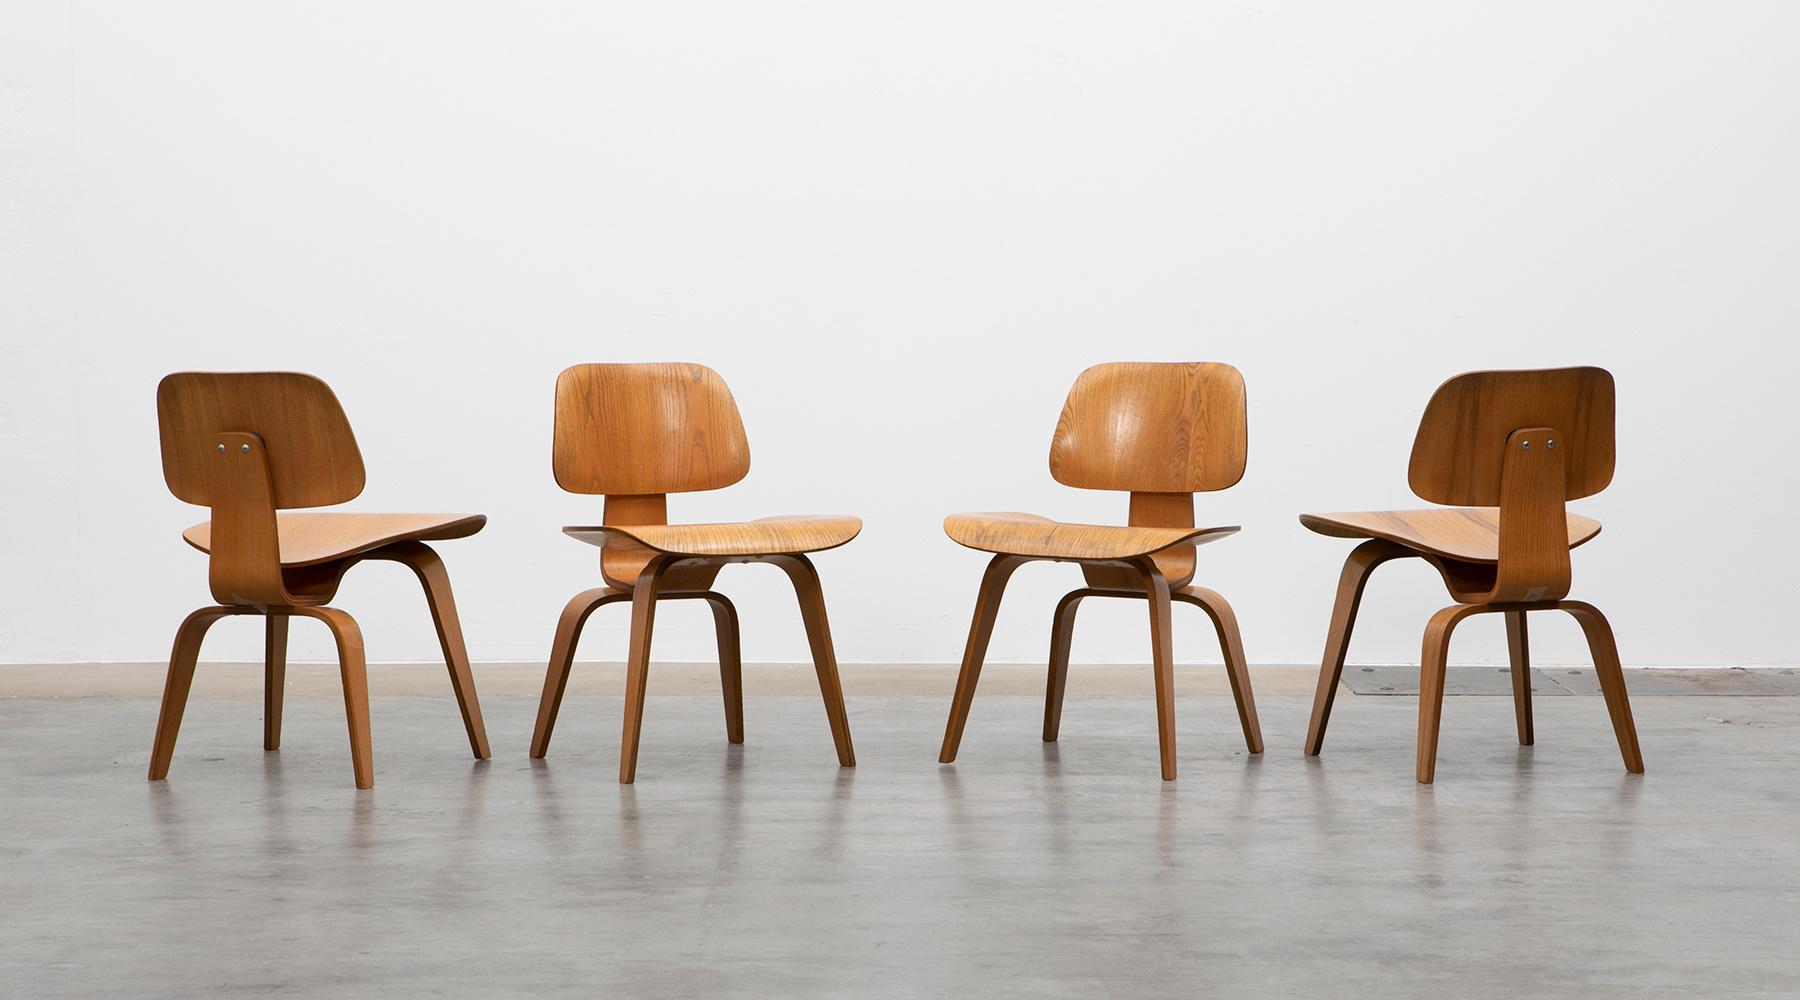 DCW chair, walnut plywood, by designer couple Eames

Iconic set of DCW chairs by famous Charles & Ray Eames. The unusual organic shape of the dining chairs makes clear the designers' innovative use of lumber-core plywood. Manufactured by Herman